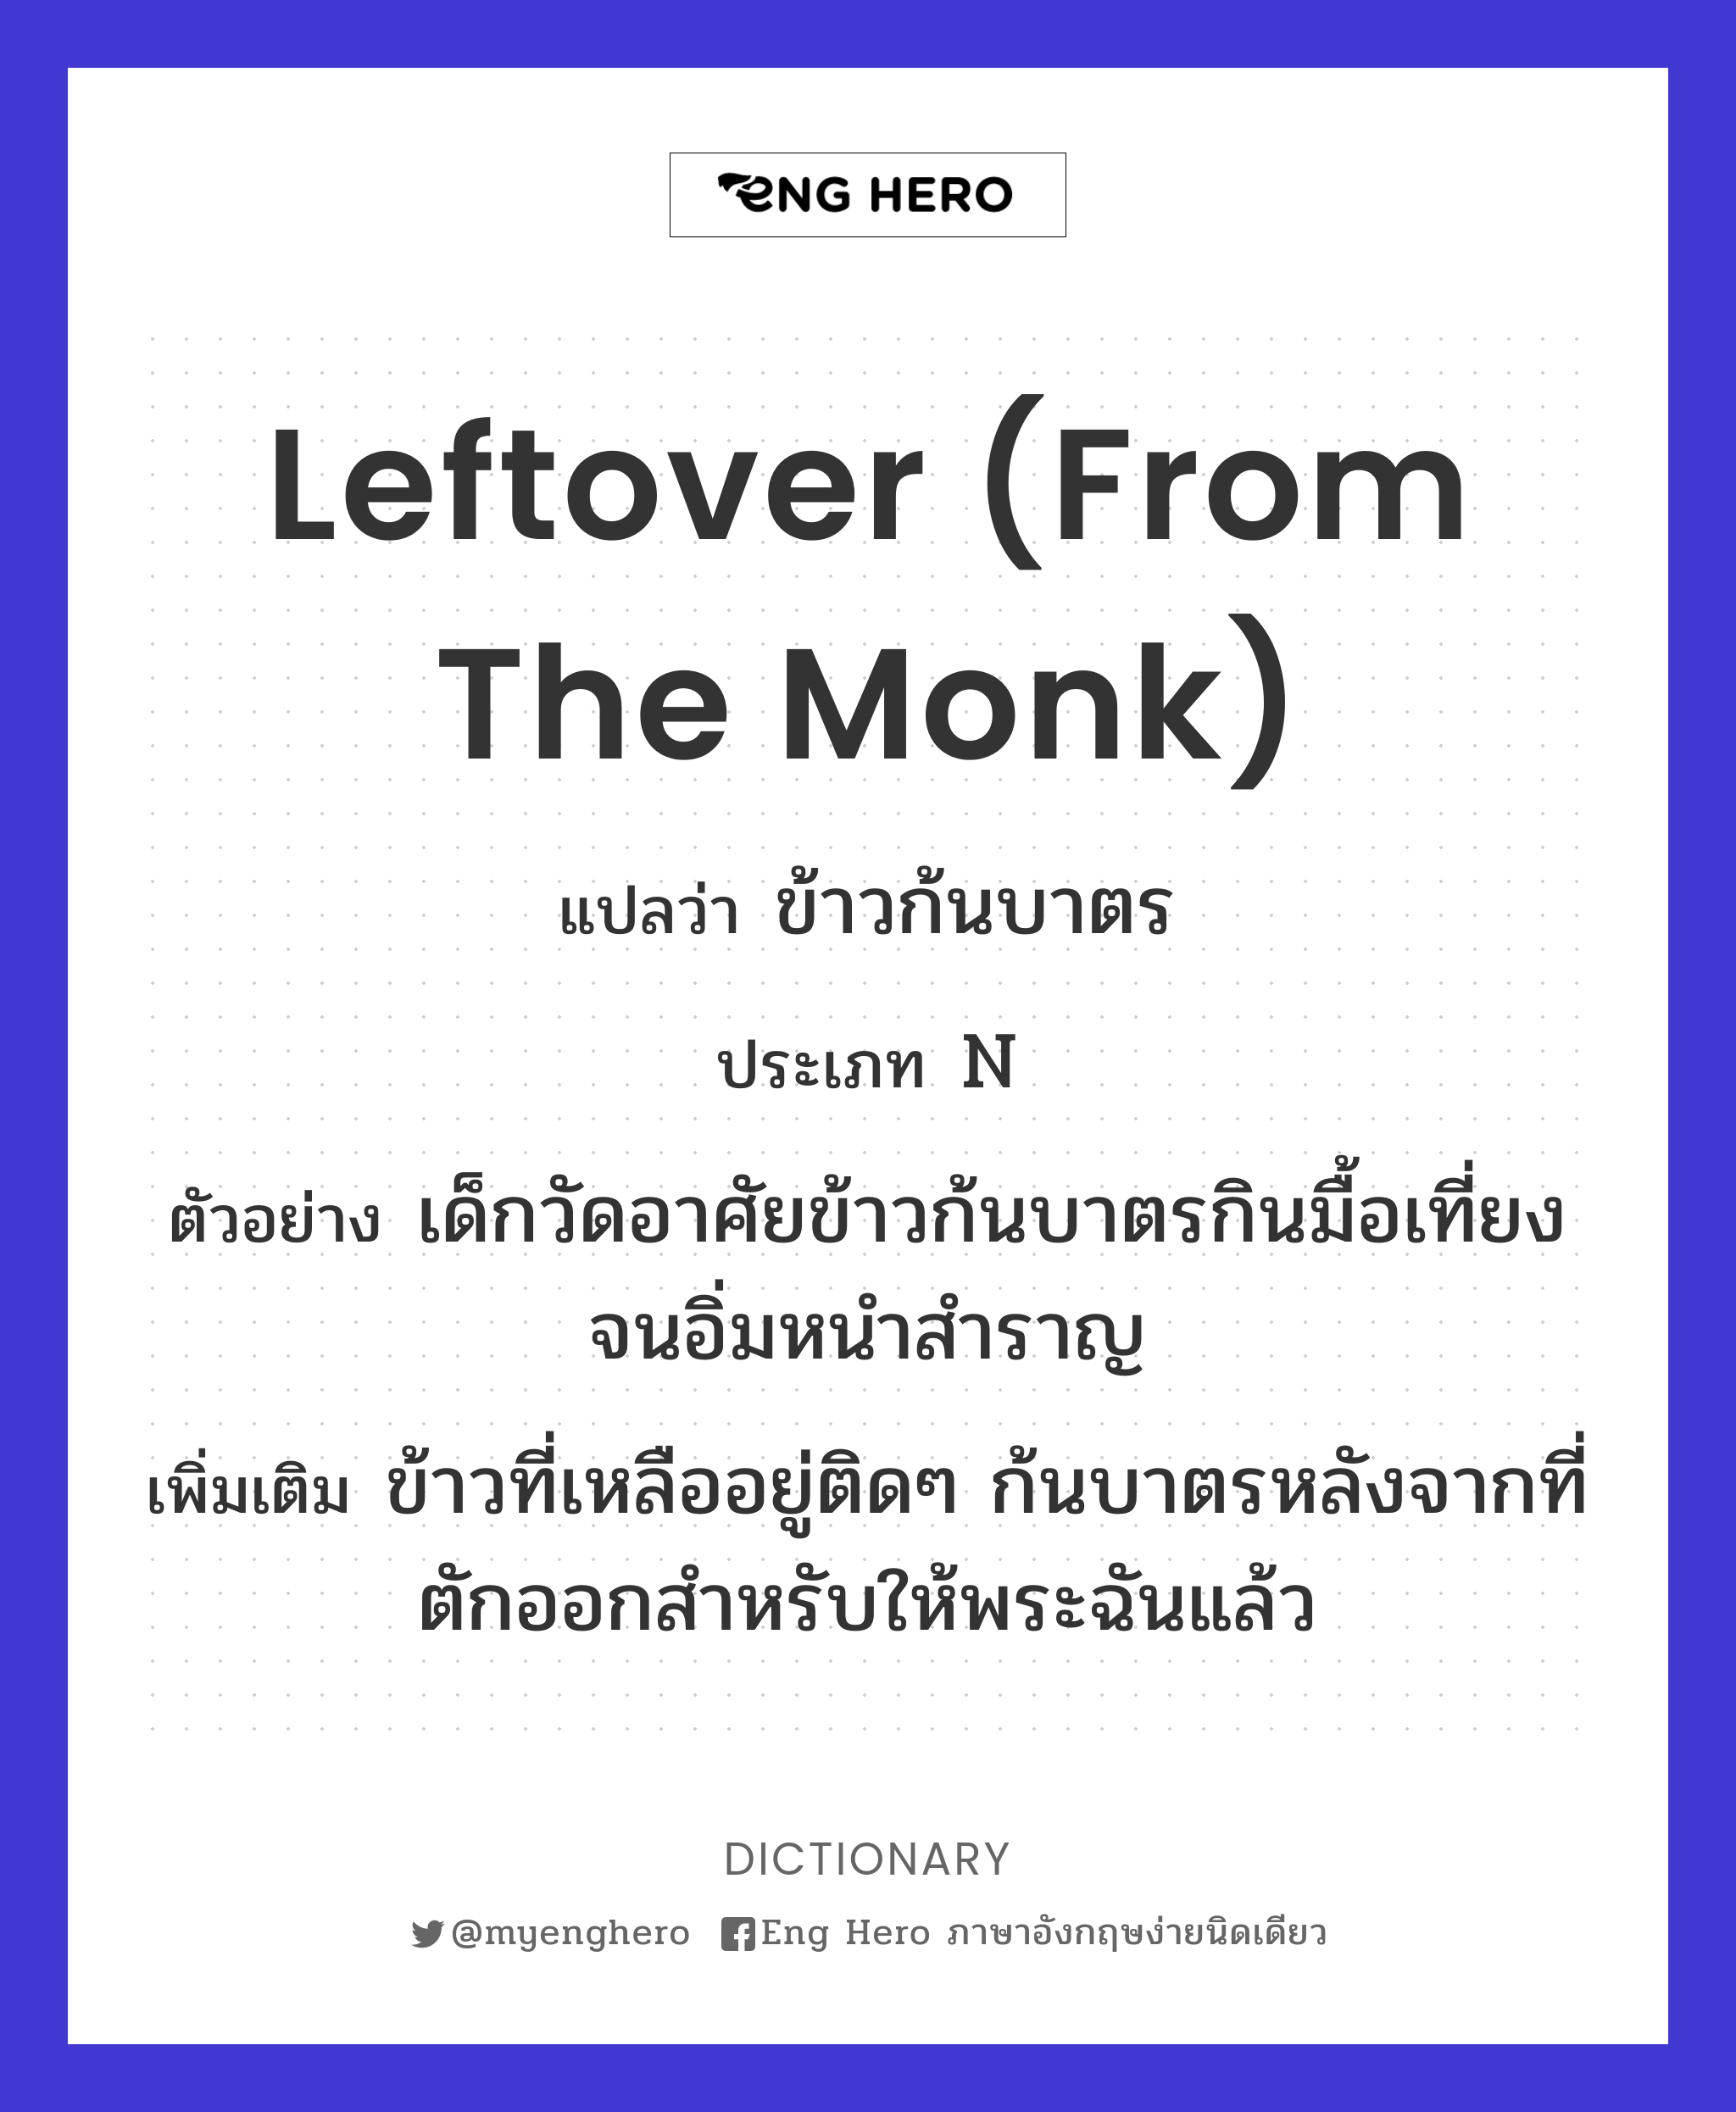 leftover (from the monk)